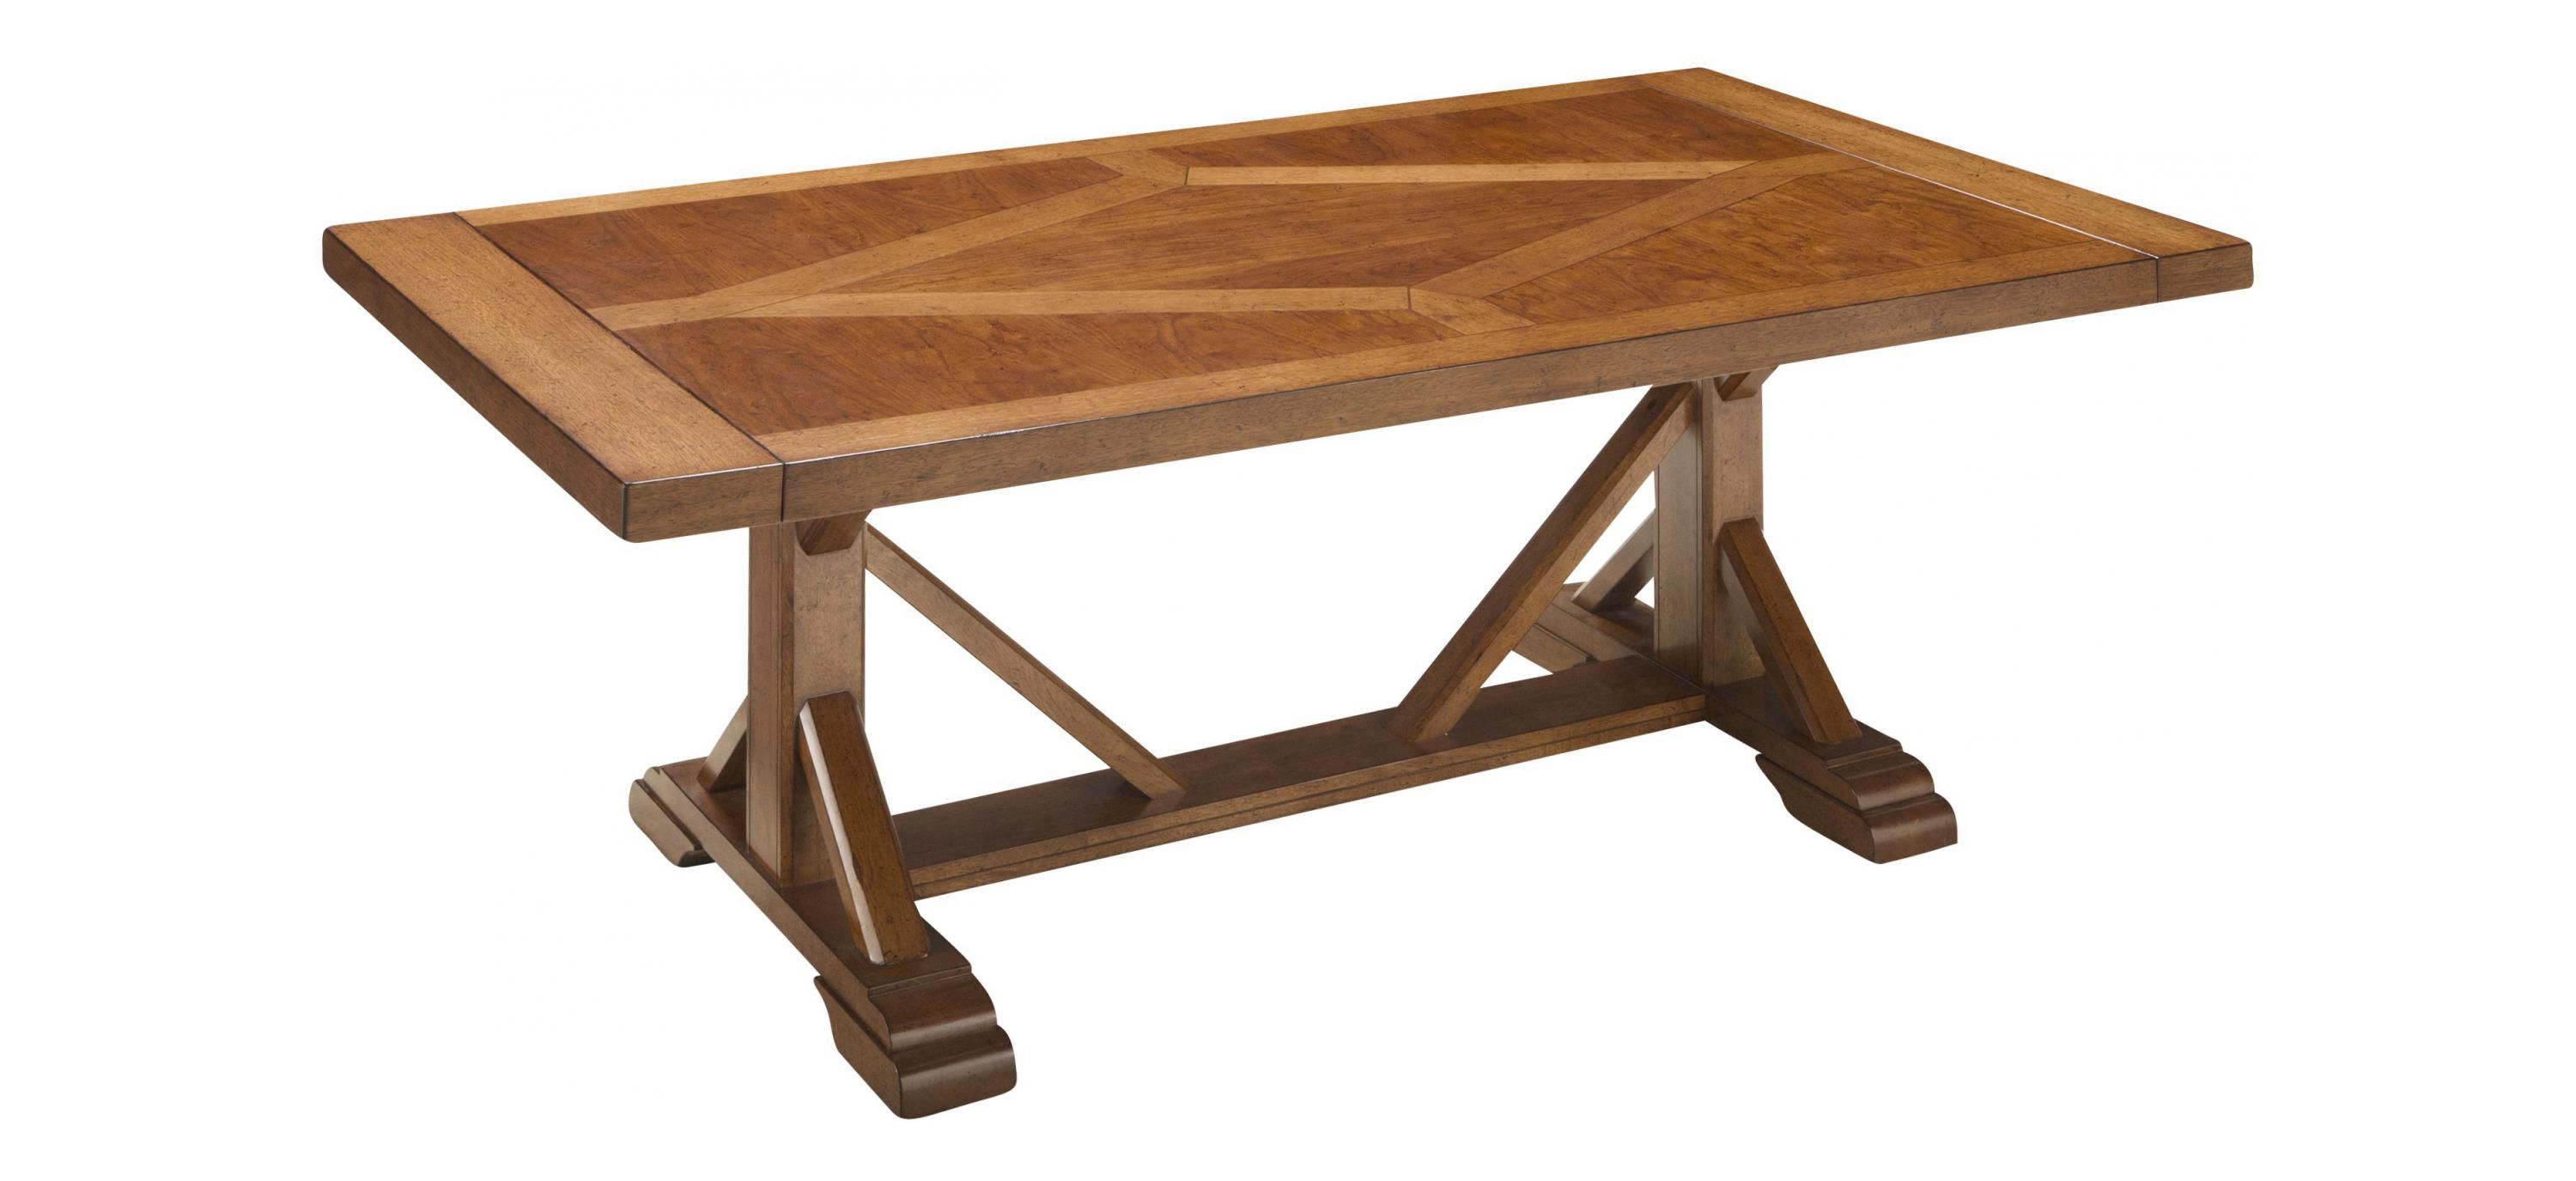 Soleste Dining Table w/ Leaves